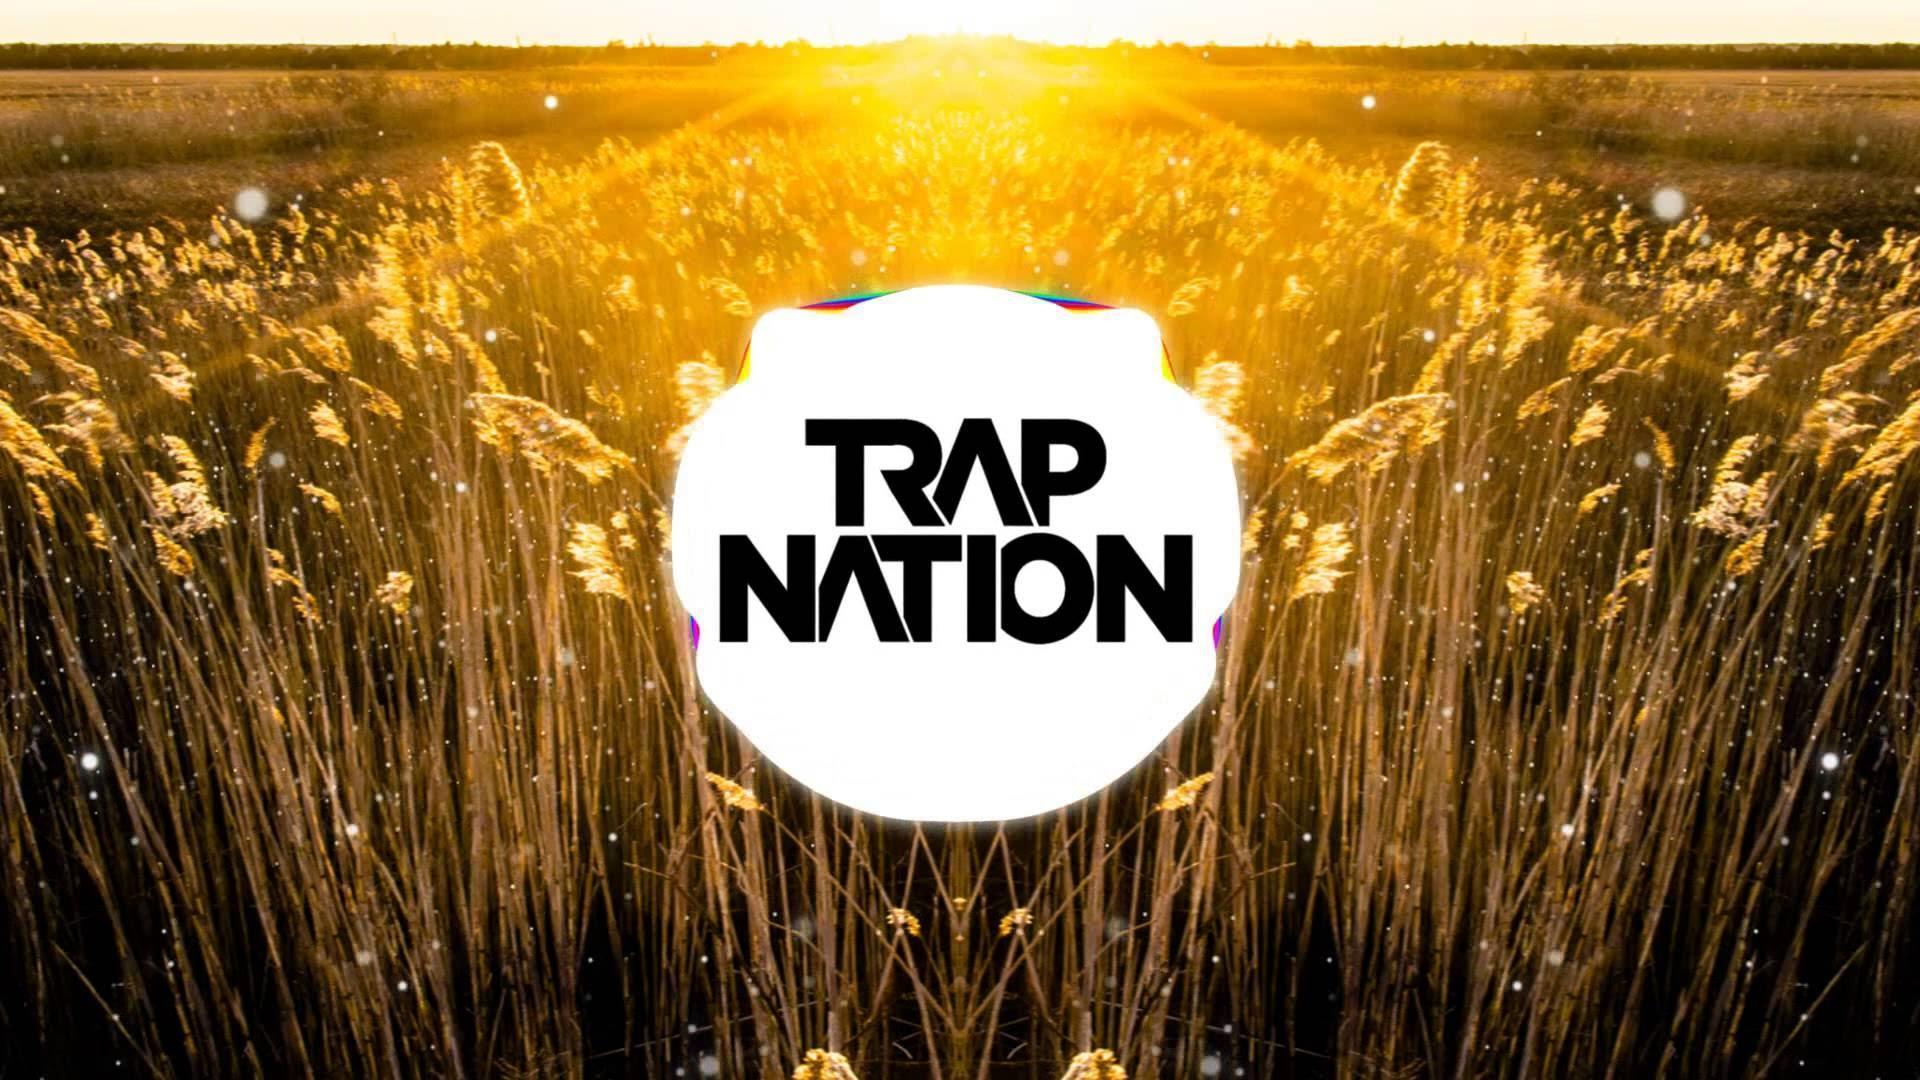 HOURS TRAP NATION MIX. Music!